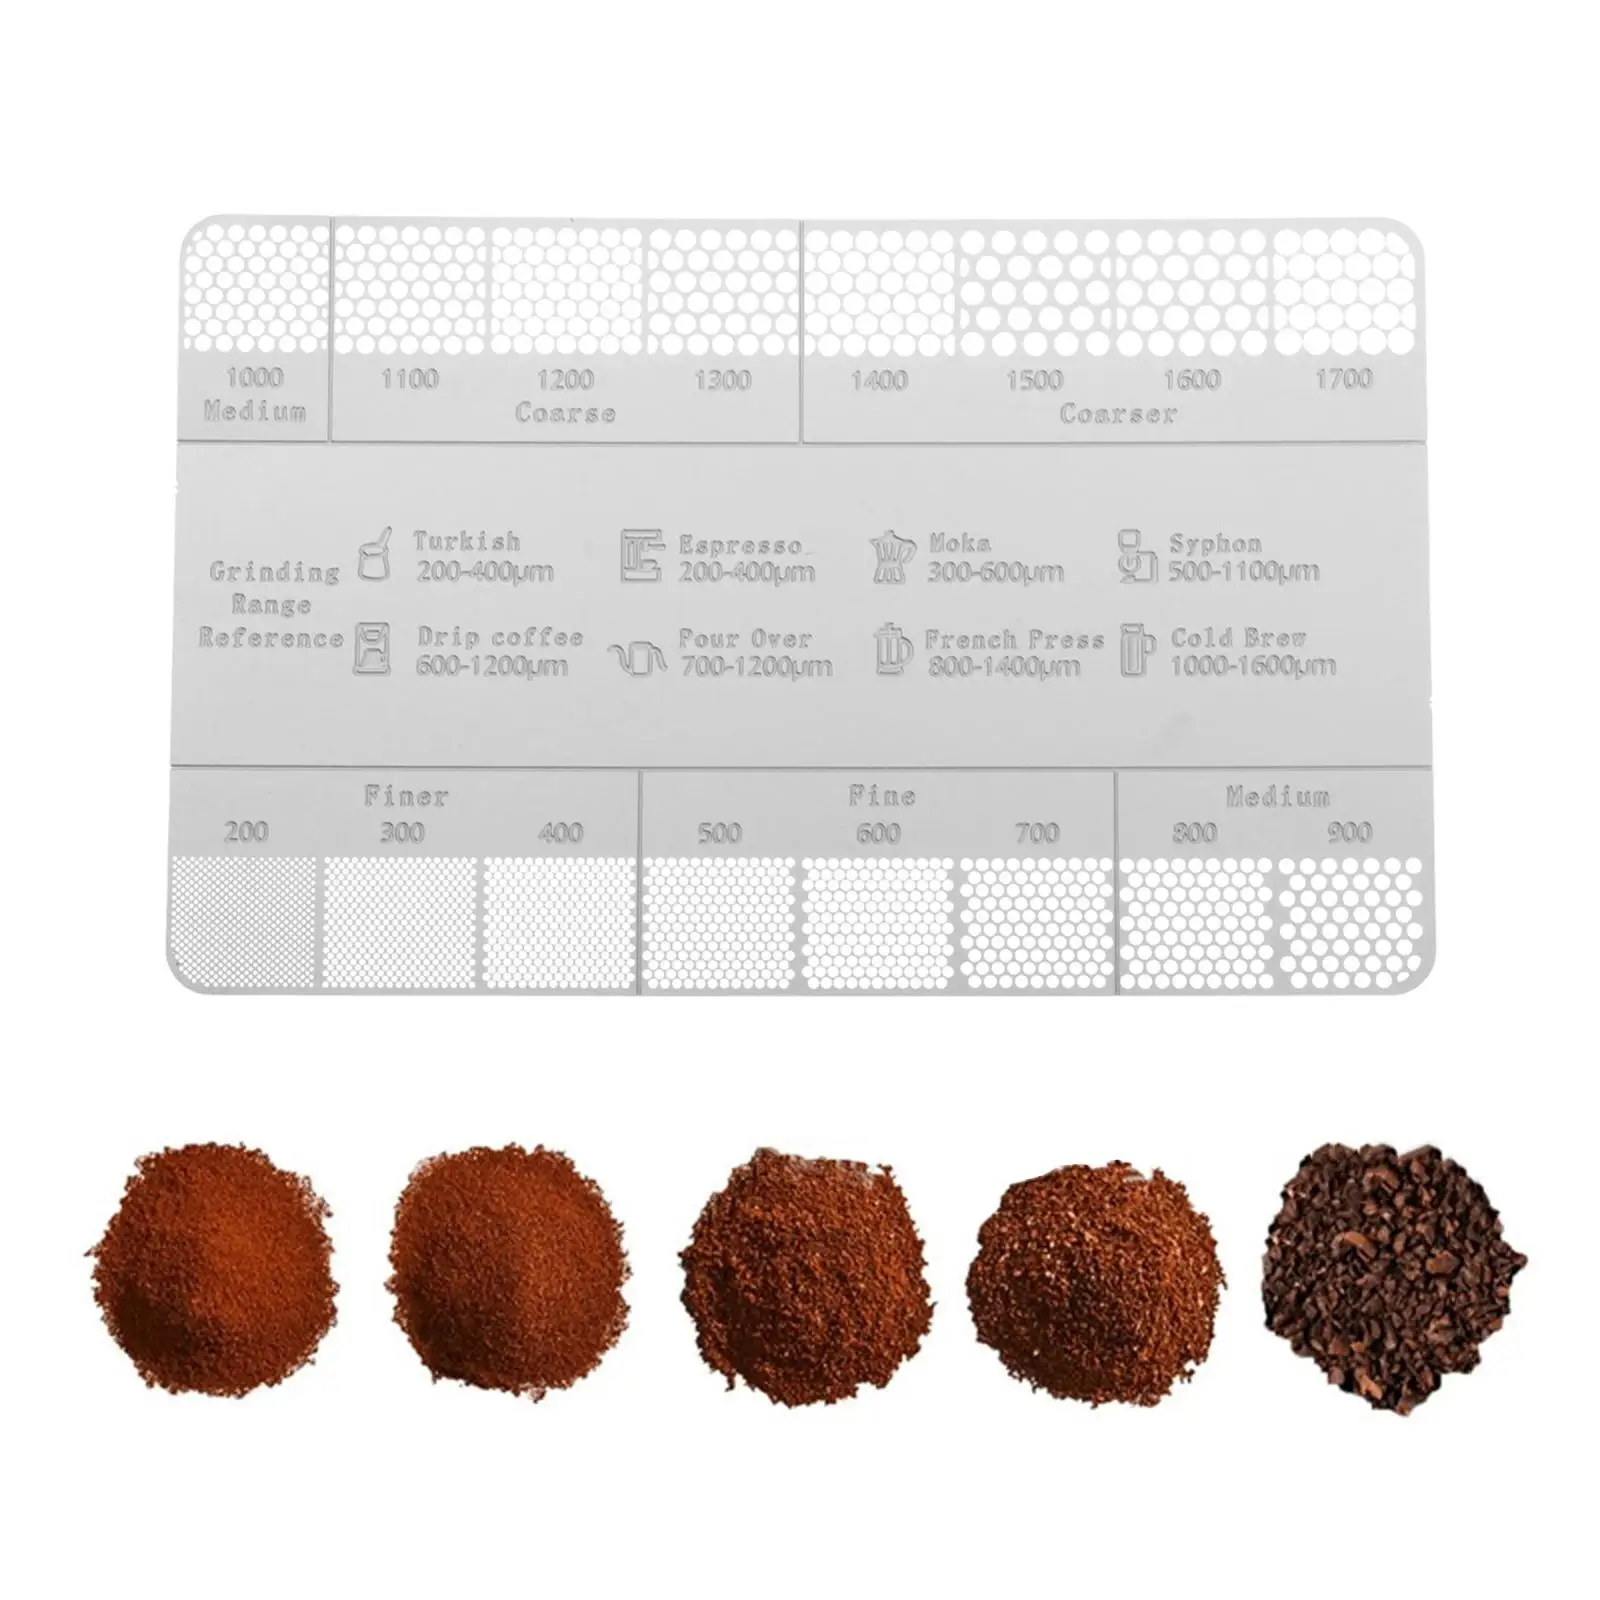 Coffee Ground Measuring Ruler Roughness Gauge Card Ground Coarseness Reference Espresso Beans Measuring for Coffee Maker Cafes